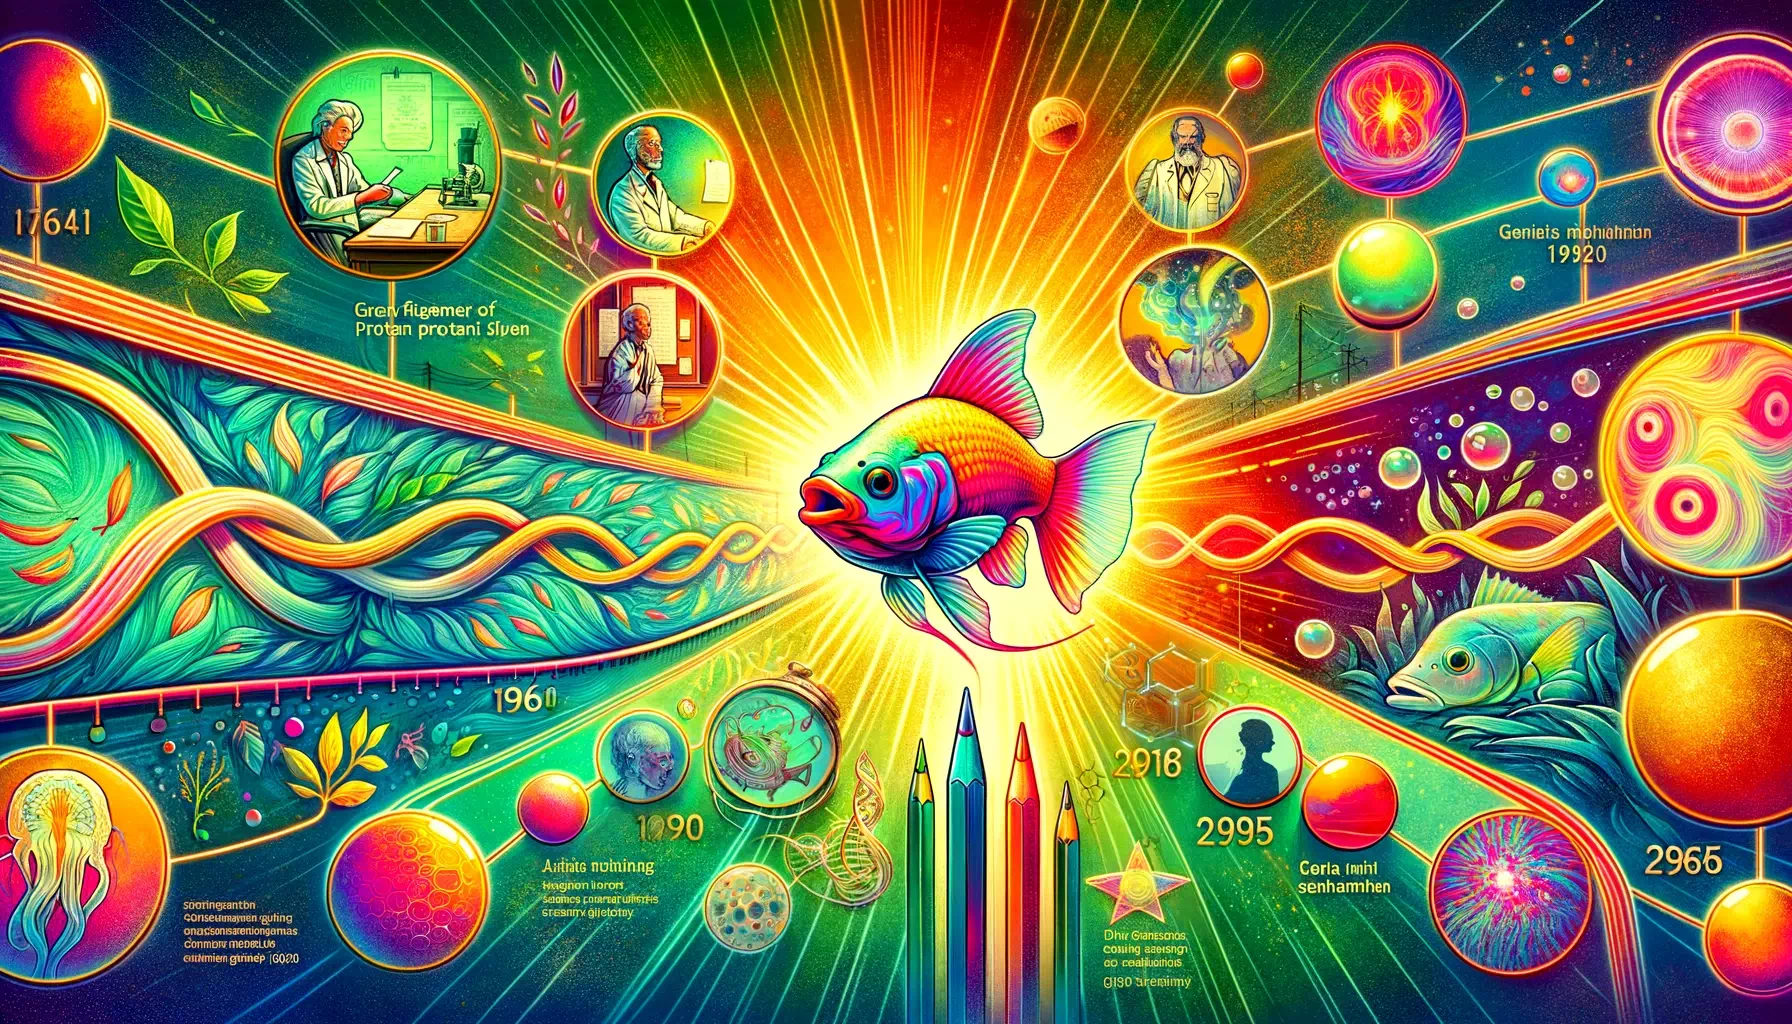 Historical Events and Scientific Advancements Leading to GloFish Creation